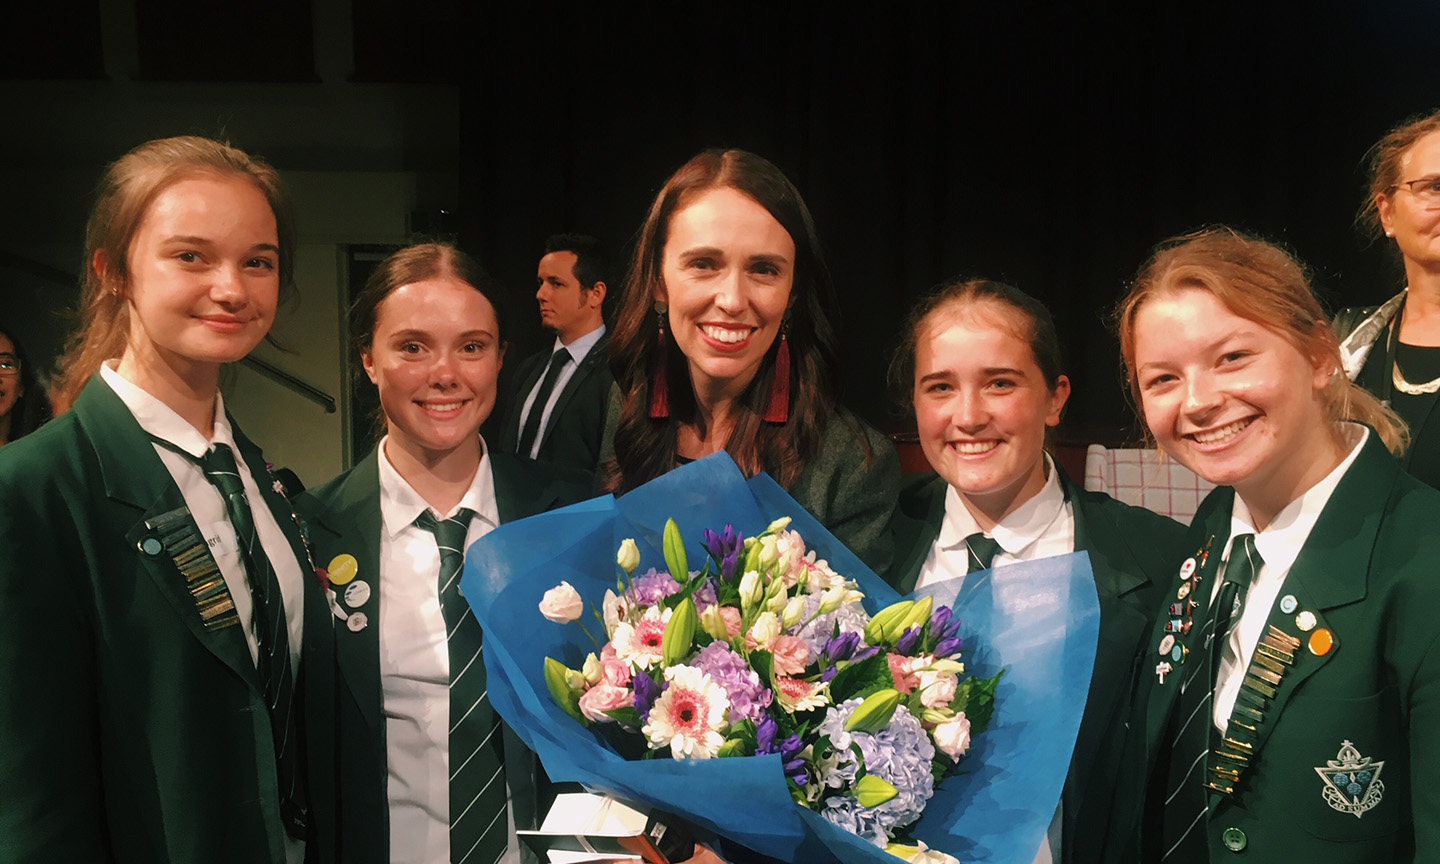 Jacinda with flowers and snr students-4web.jpg